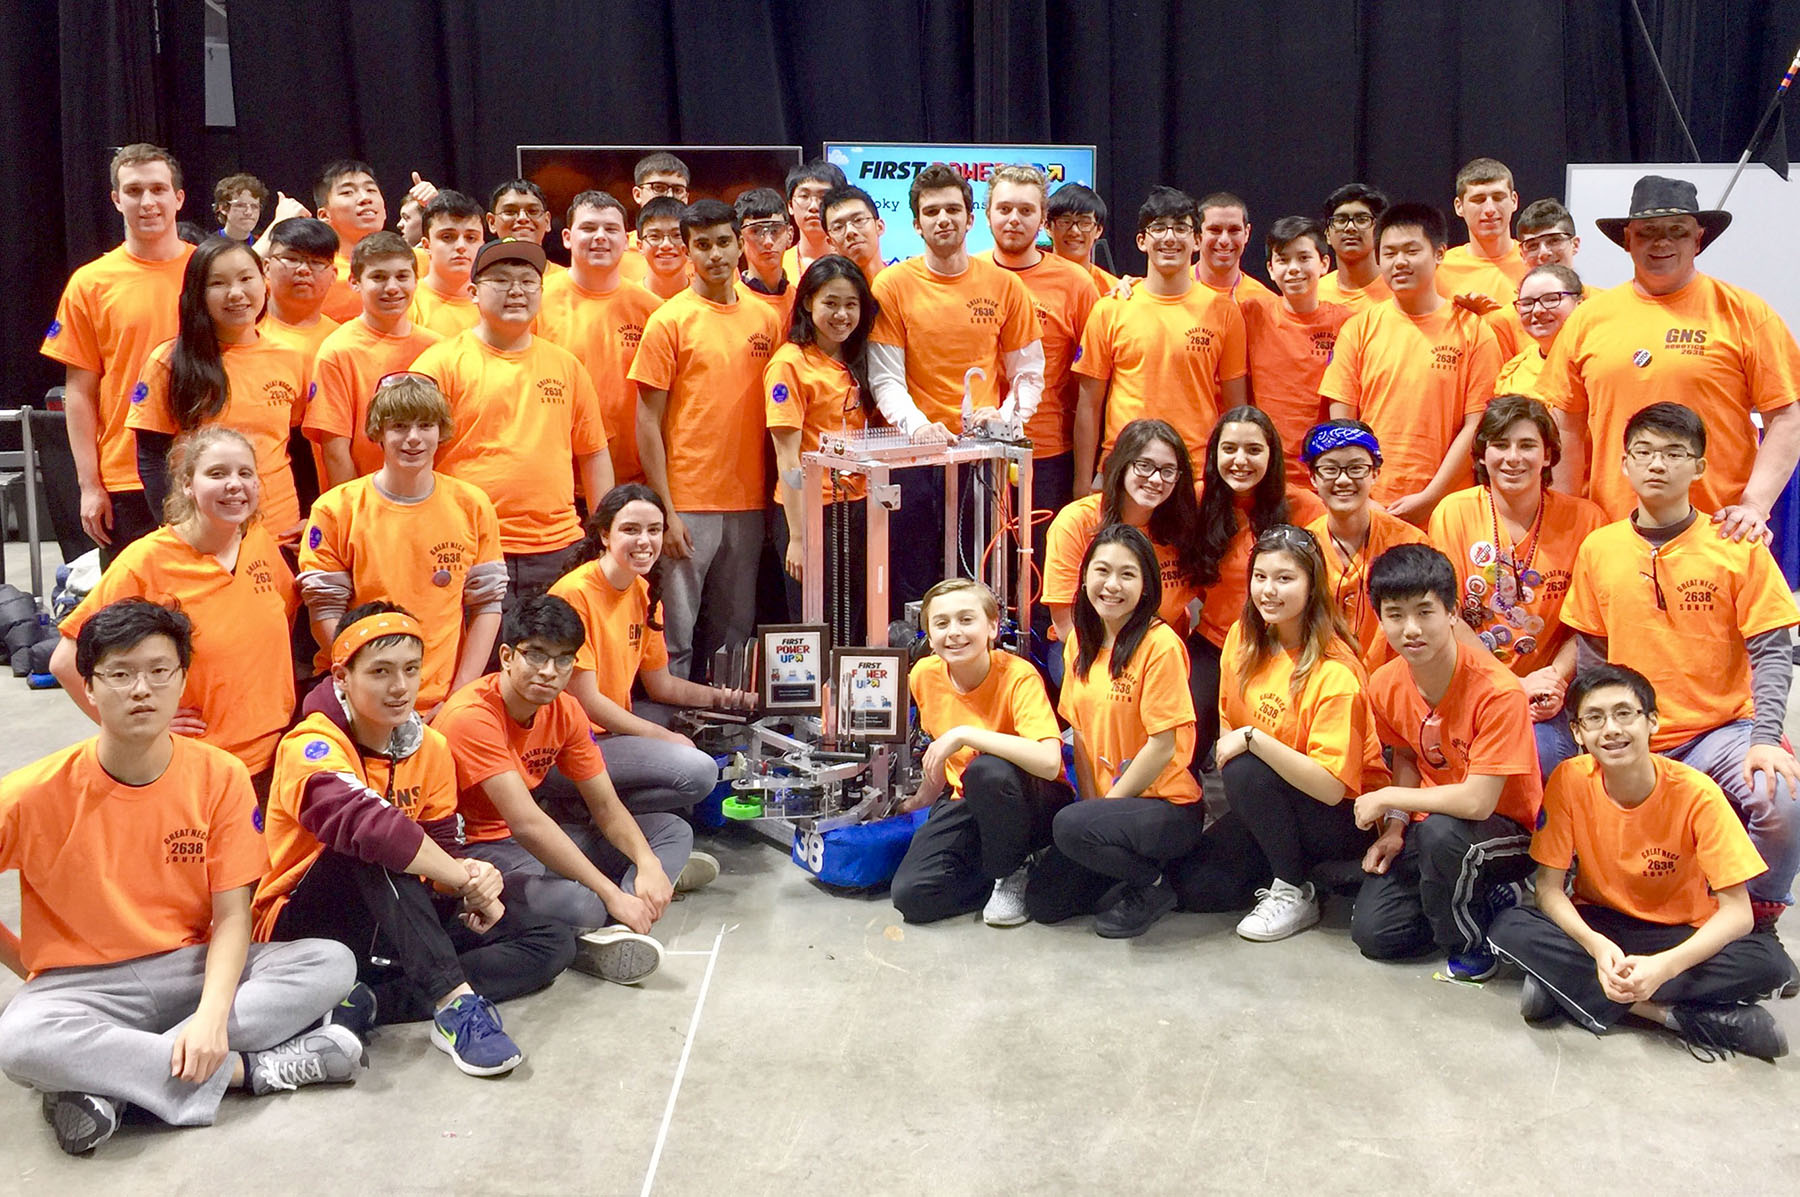 The South High "Rebellion" was among the top teams in a national robotics competition. (Photo courtesy of the Great Neck Public Schools)